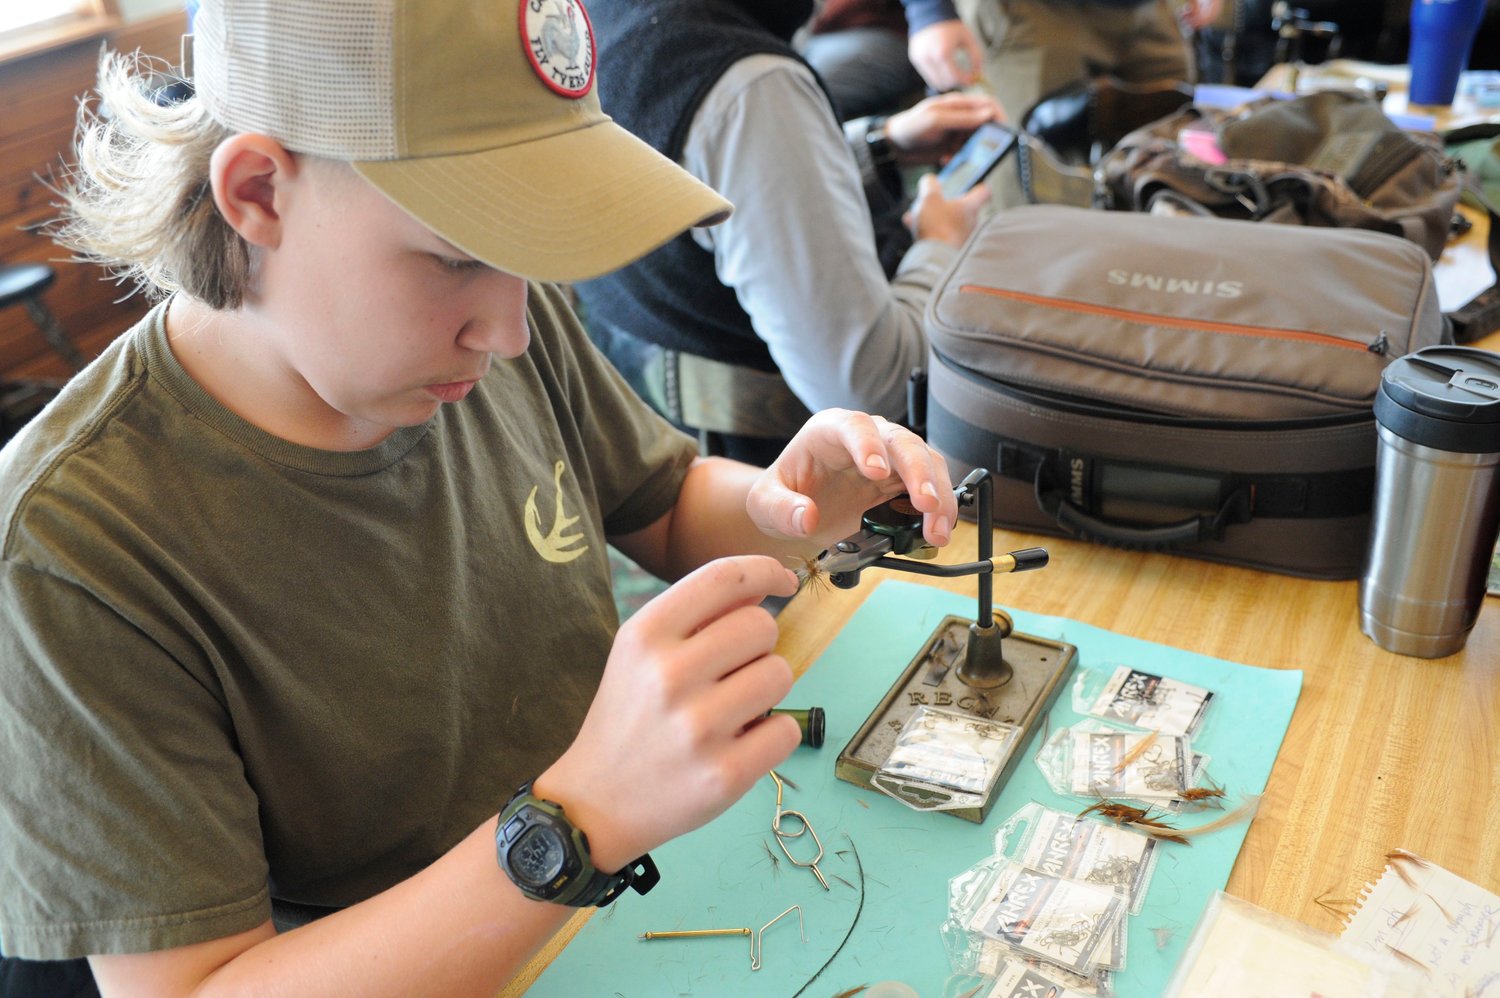 Andrew Sander, 13, of East Meredith, NY, was joined at Fly Fest 2022 by his father Henry, part of a self-described outdoors family. Andrew was mentored in the art of fly-tying by Joe Ceballos, president of the Catskill Fly Tyers Guild.